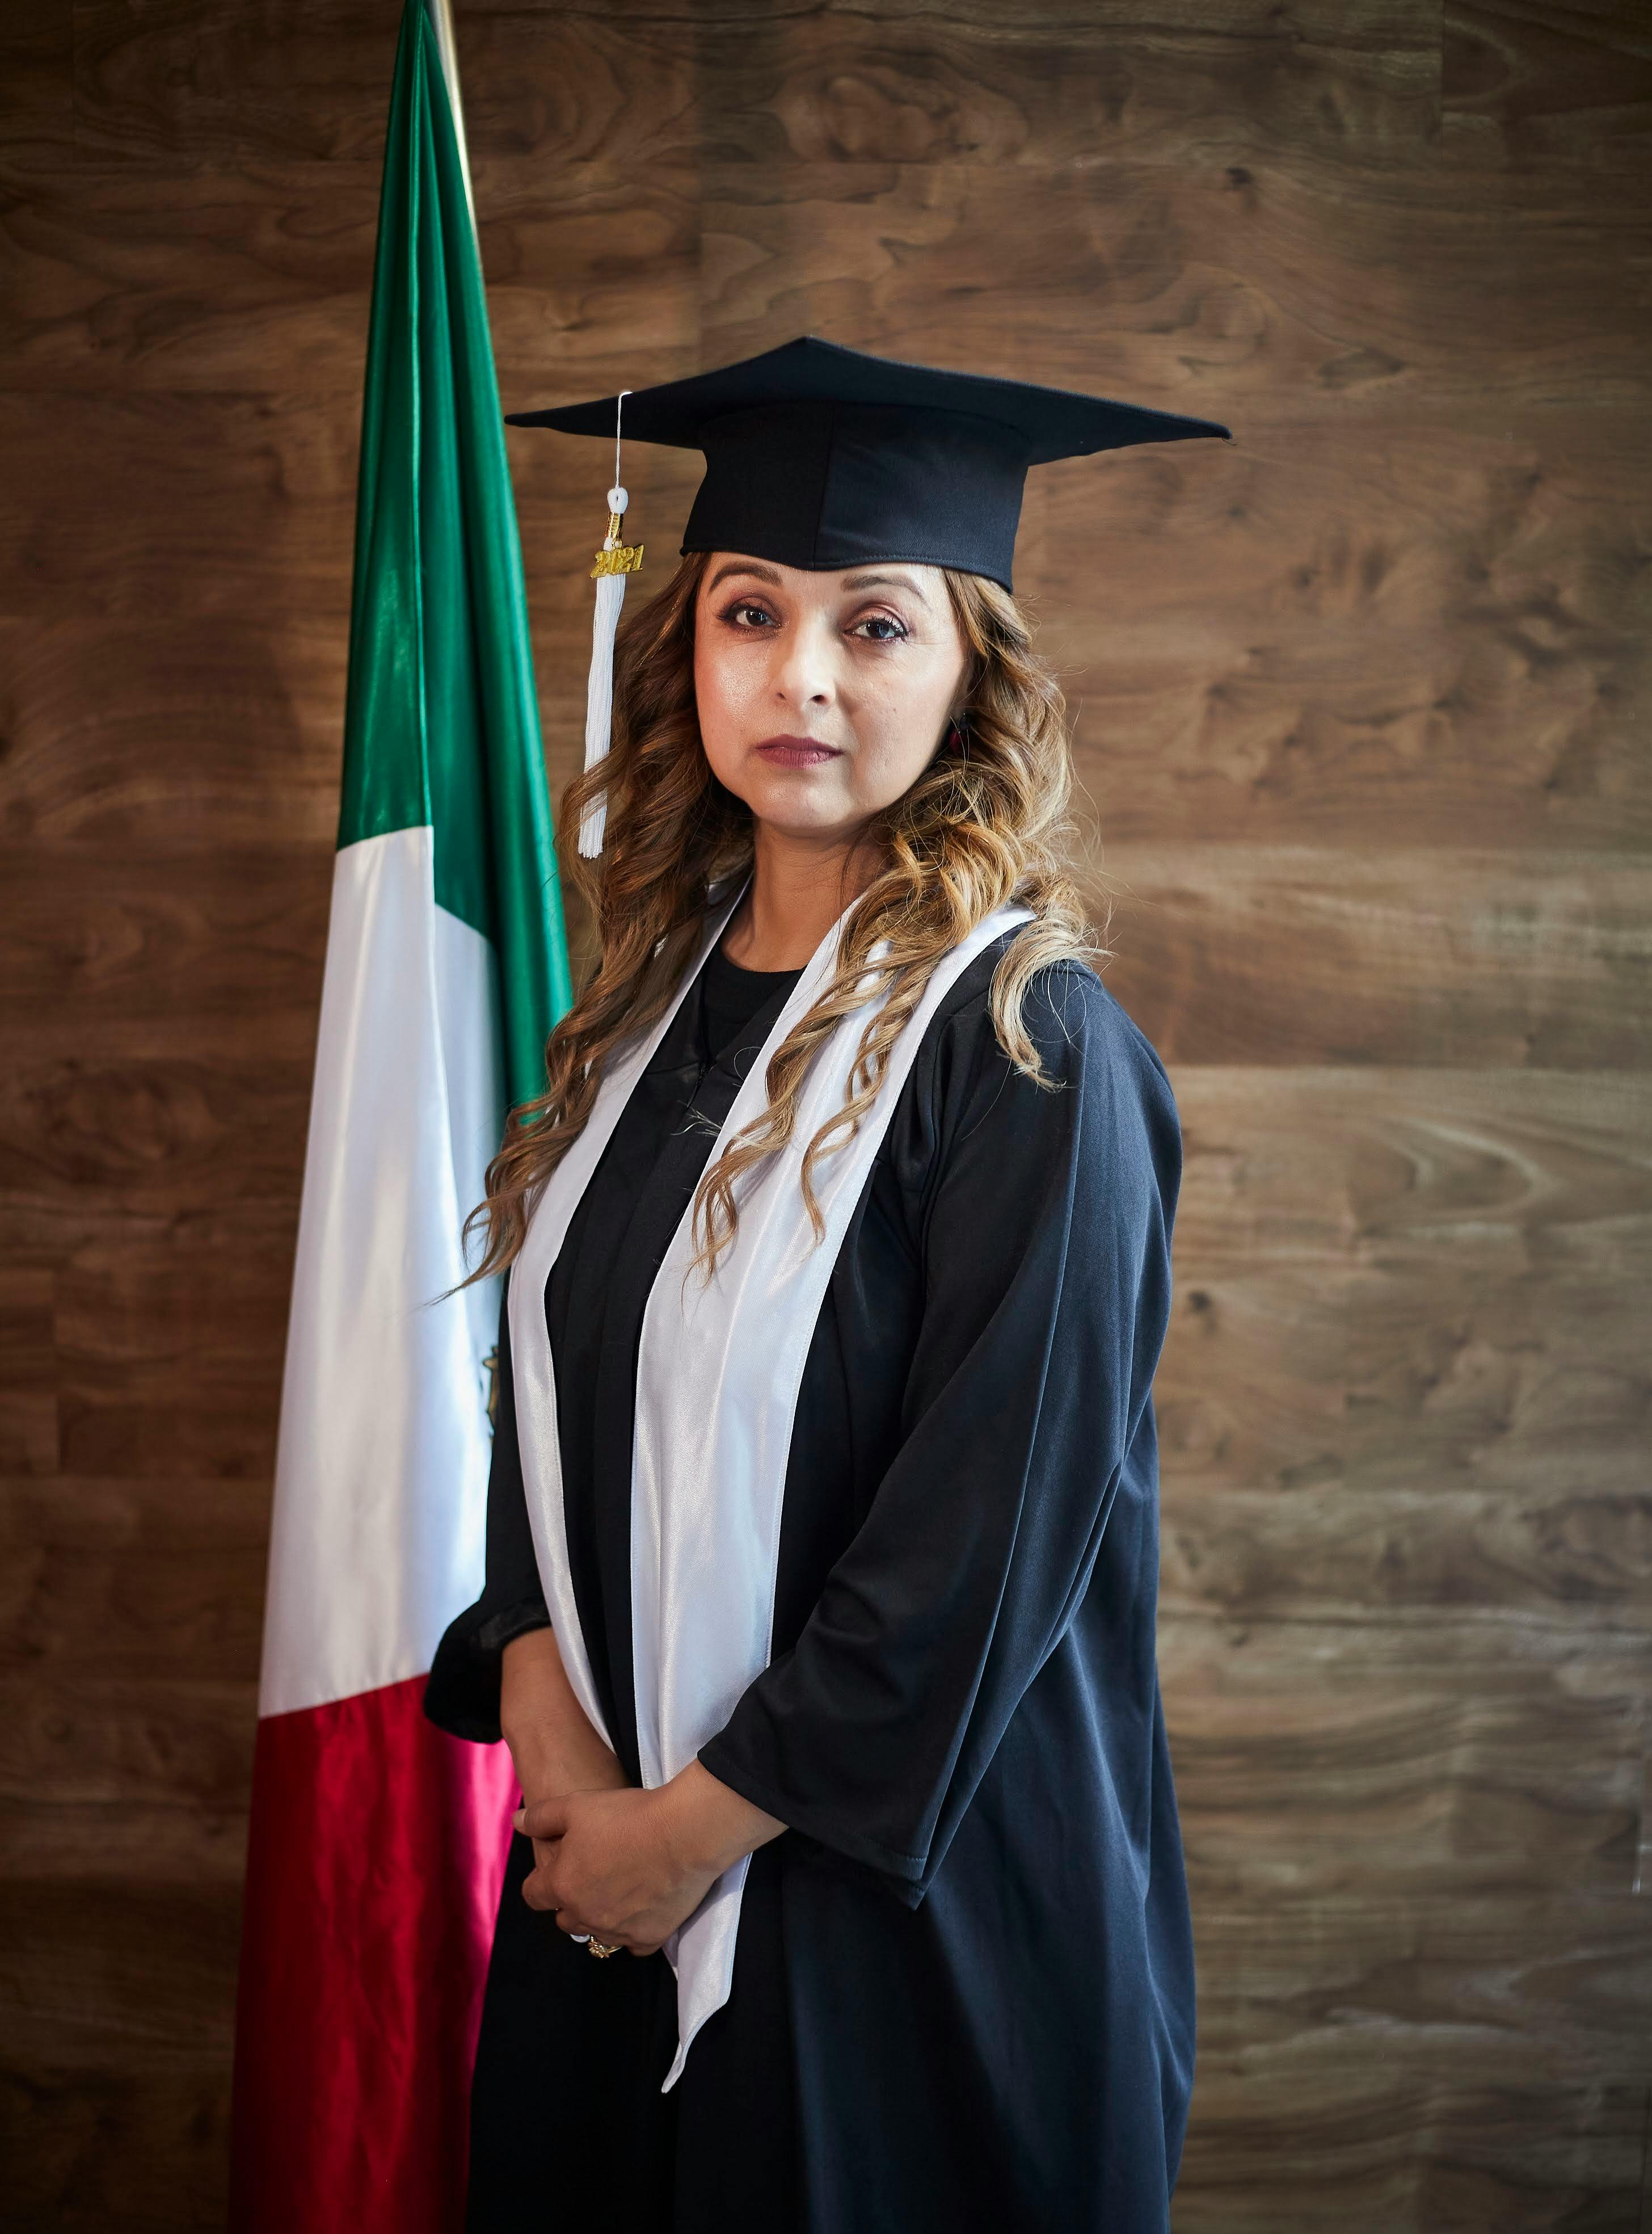 A woman in a graduation cap and gown photo – Free Gown Image on Unsplash